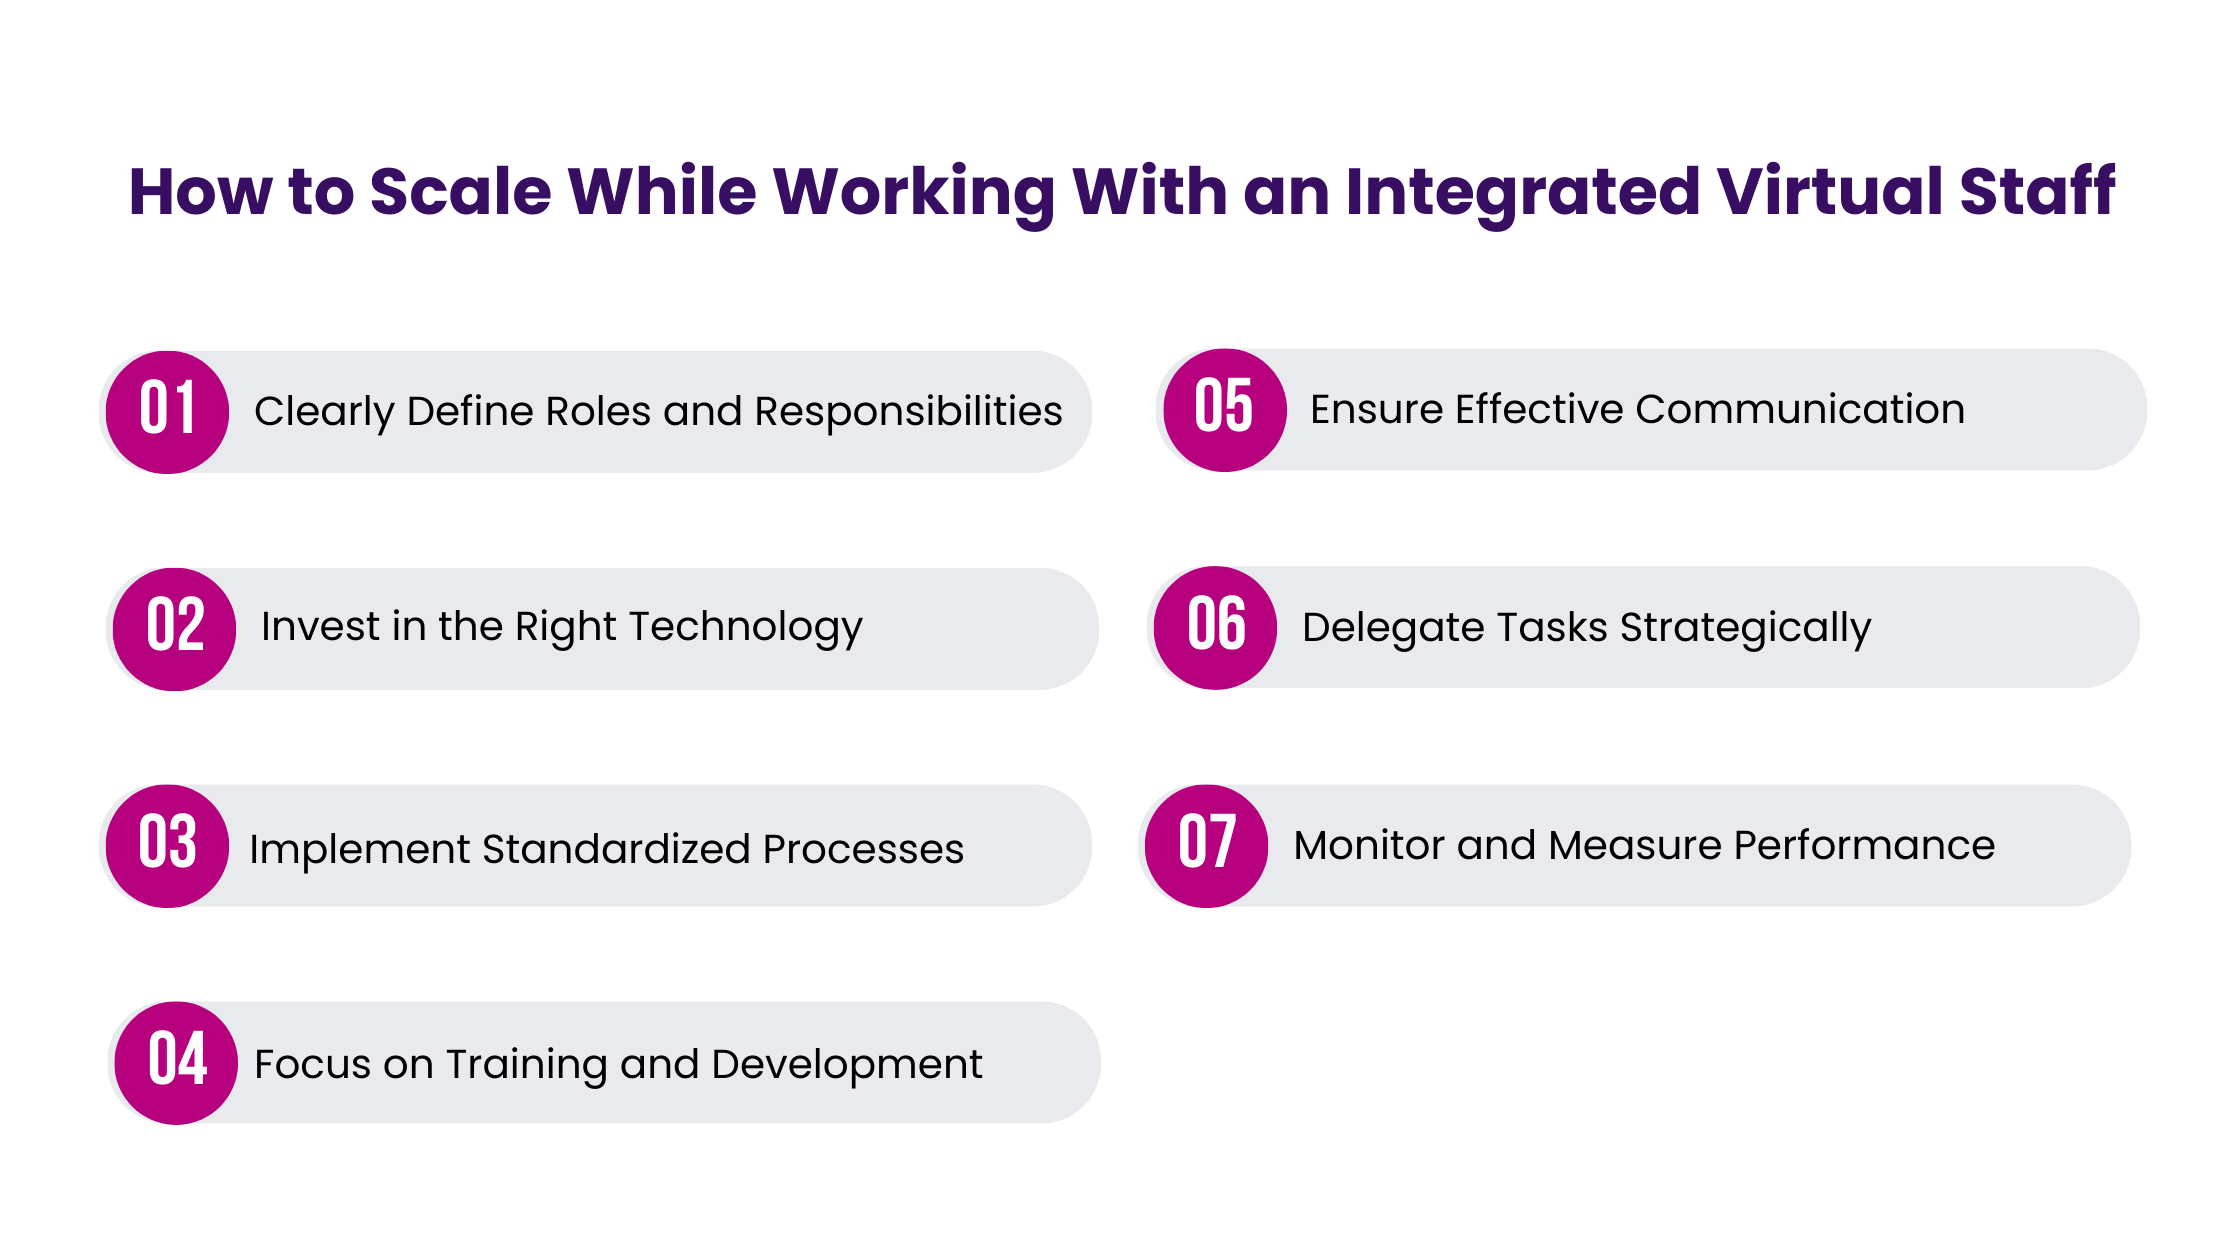 How to Scale While Working With an Integrated Virtual Staff